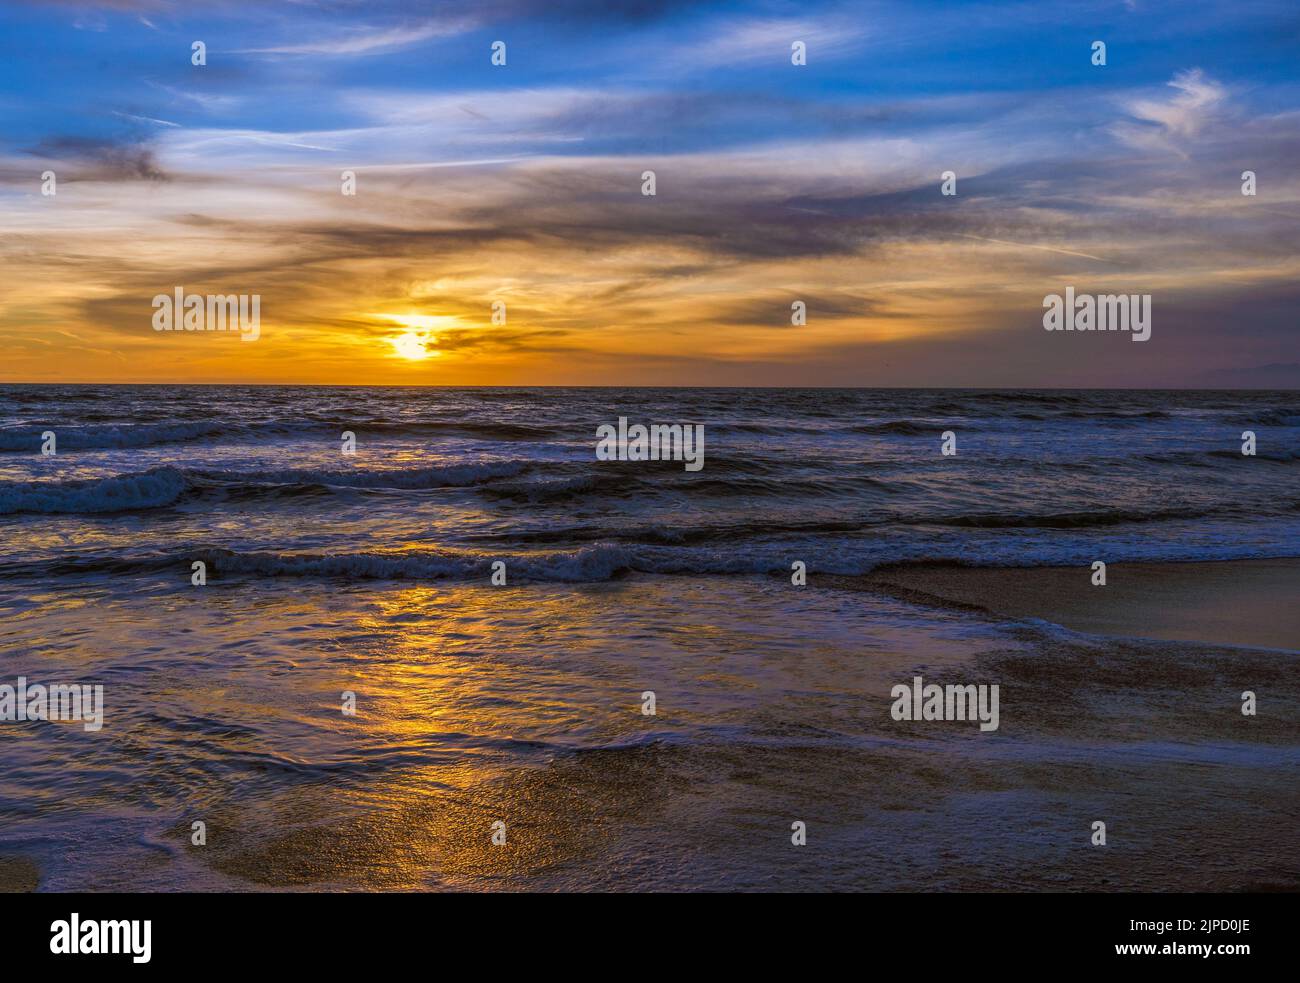 A beautiful view of the calm sea at the orange sunset, Hollywood Beach, California Stock Photo